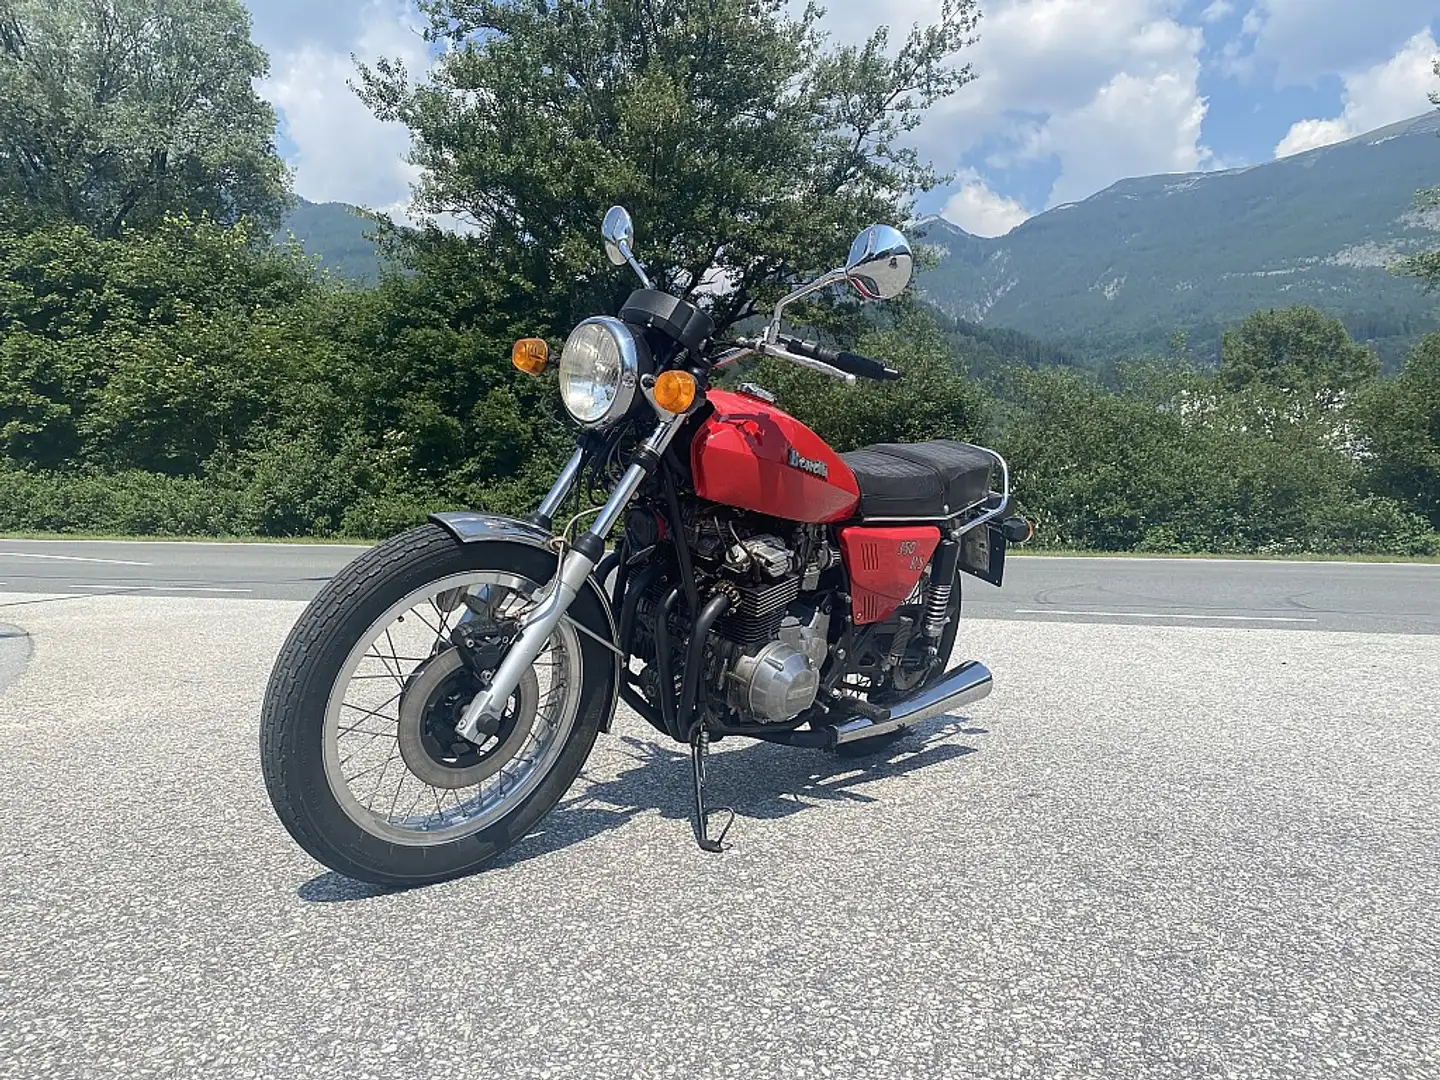 Benelli 350 RS Rot - 2